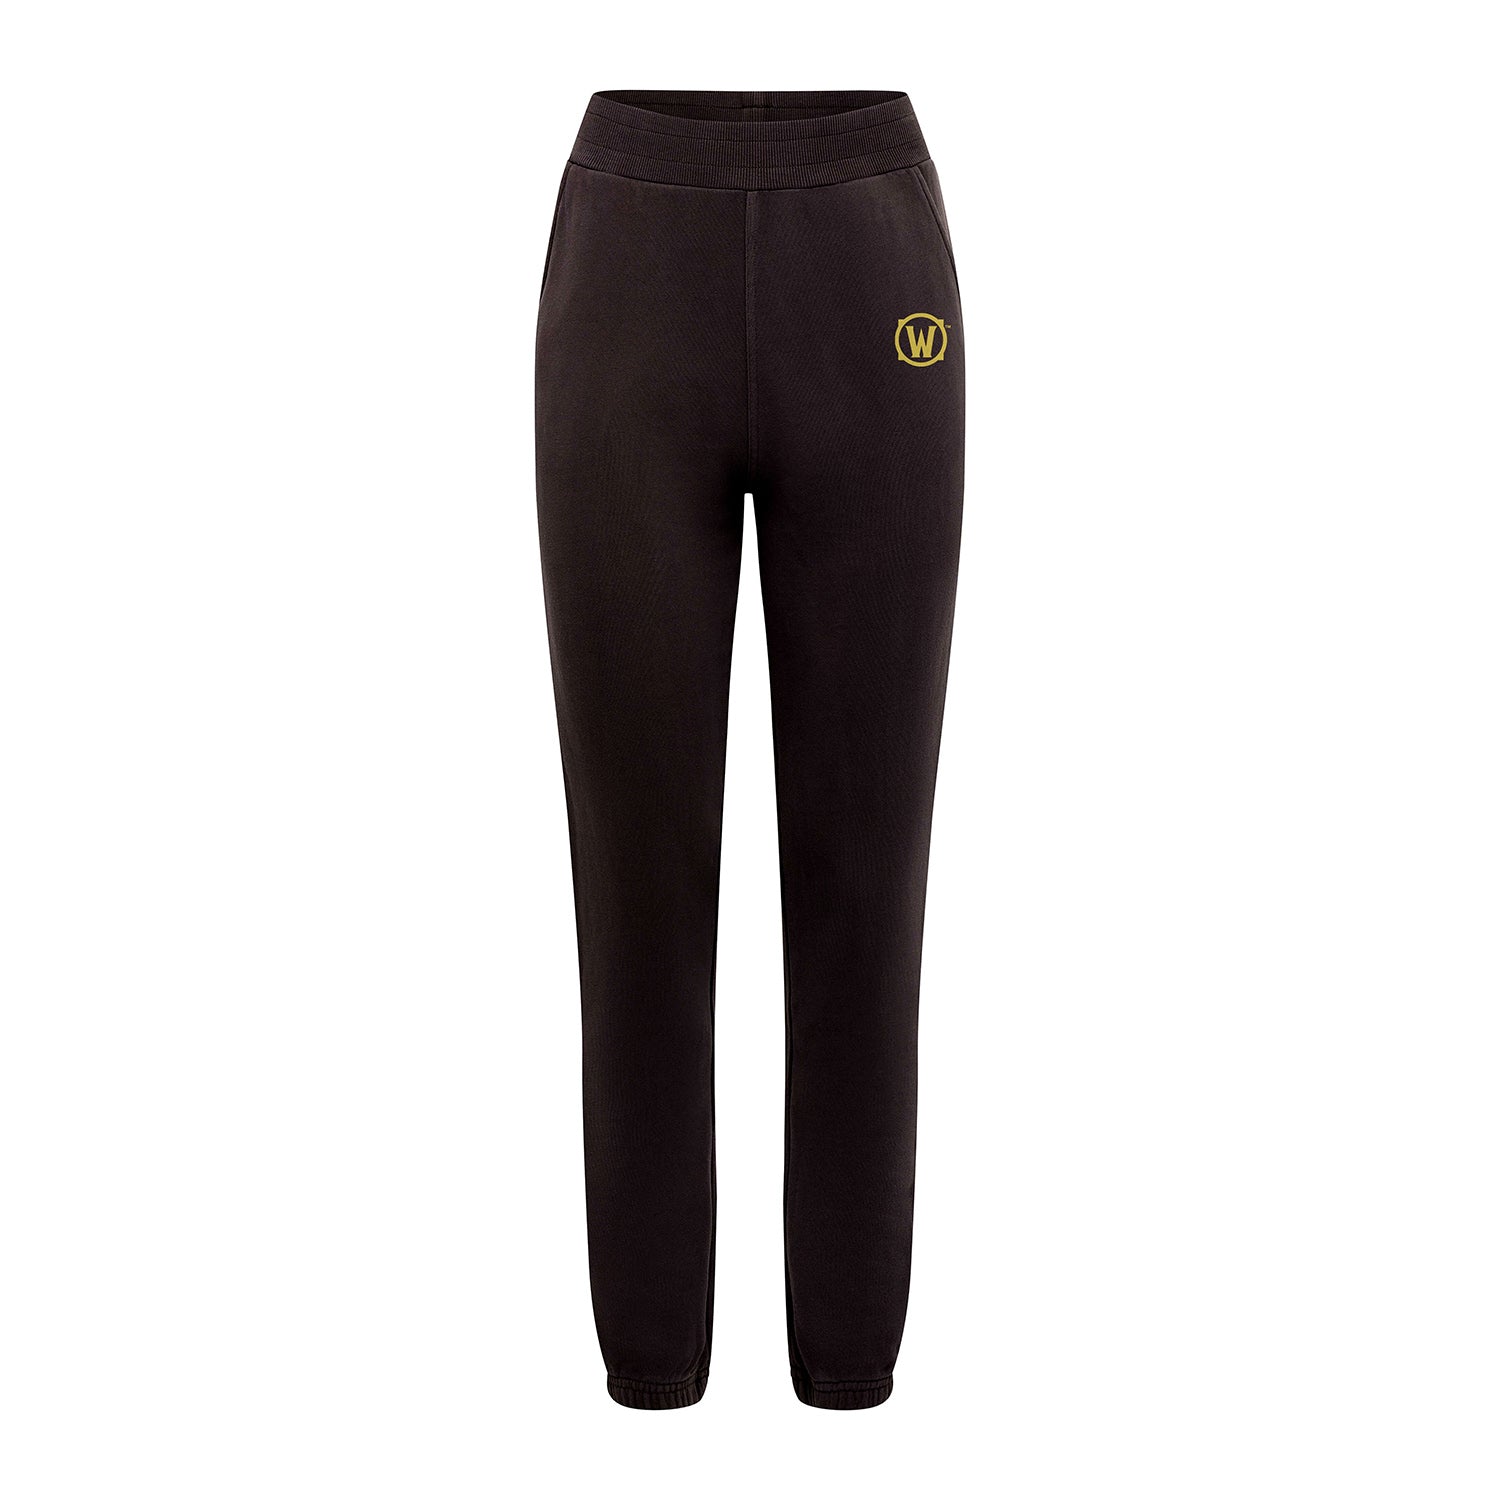 World of Warcraft Women's Black Icon Joggers - Front View